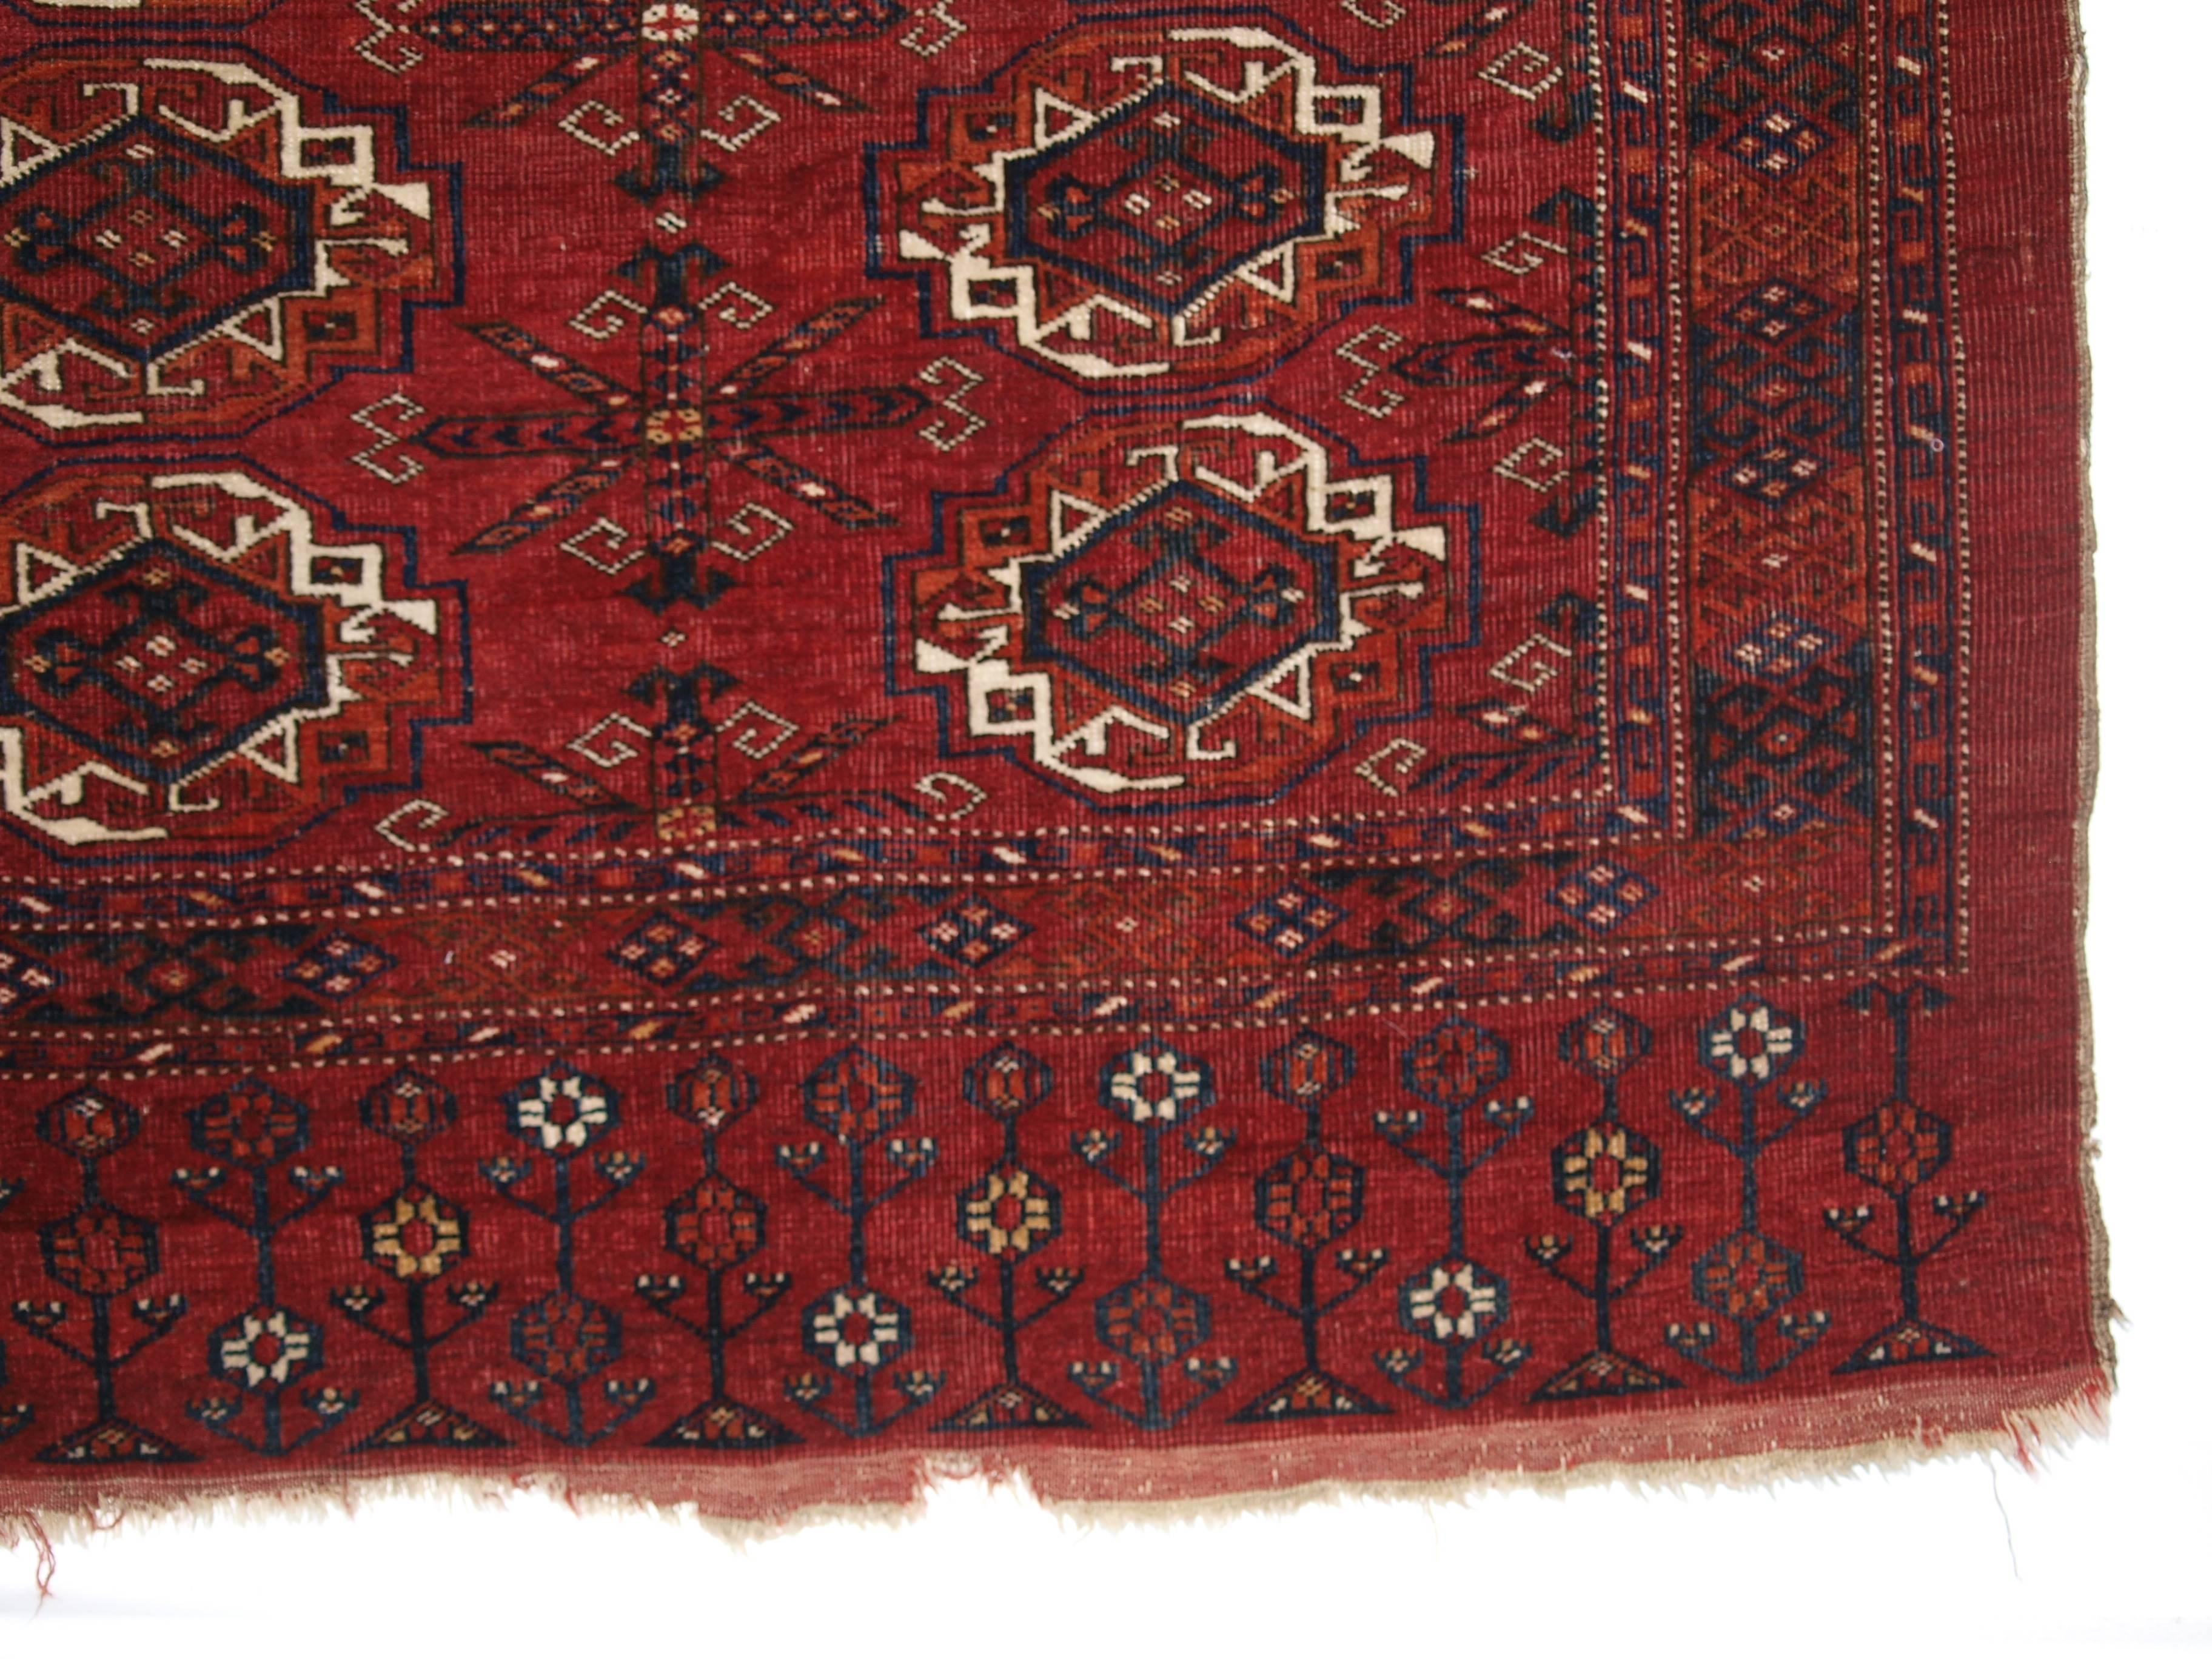 Antique Ersari Turkmen 12 Gul Chuval, superb floral elem, circa 1900.
Size: 5ft 1in x 3ft 5in (154 x 103cm). 

Antique Ersari Turkmen 12 gul chuval of large size, with superb rich color. The elem design is a really outstanding flower